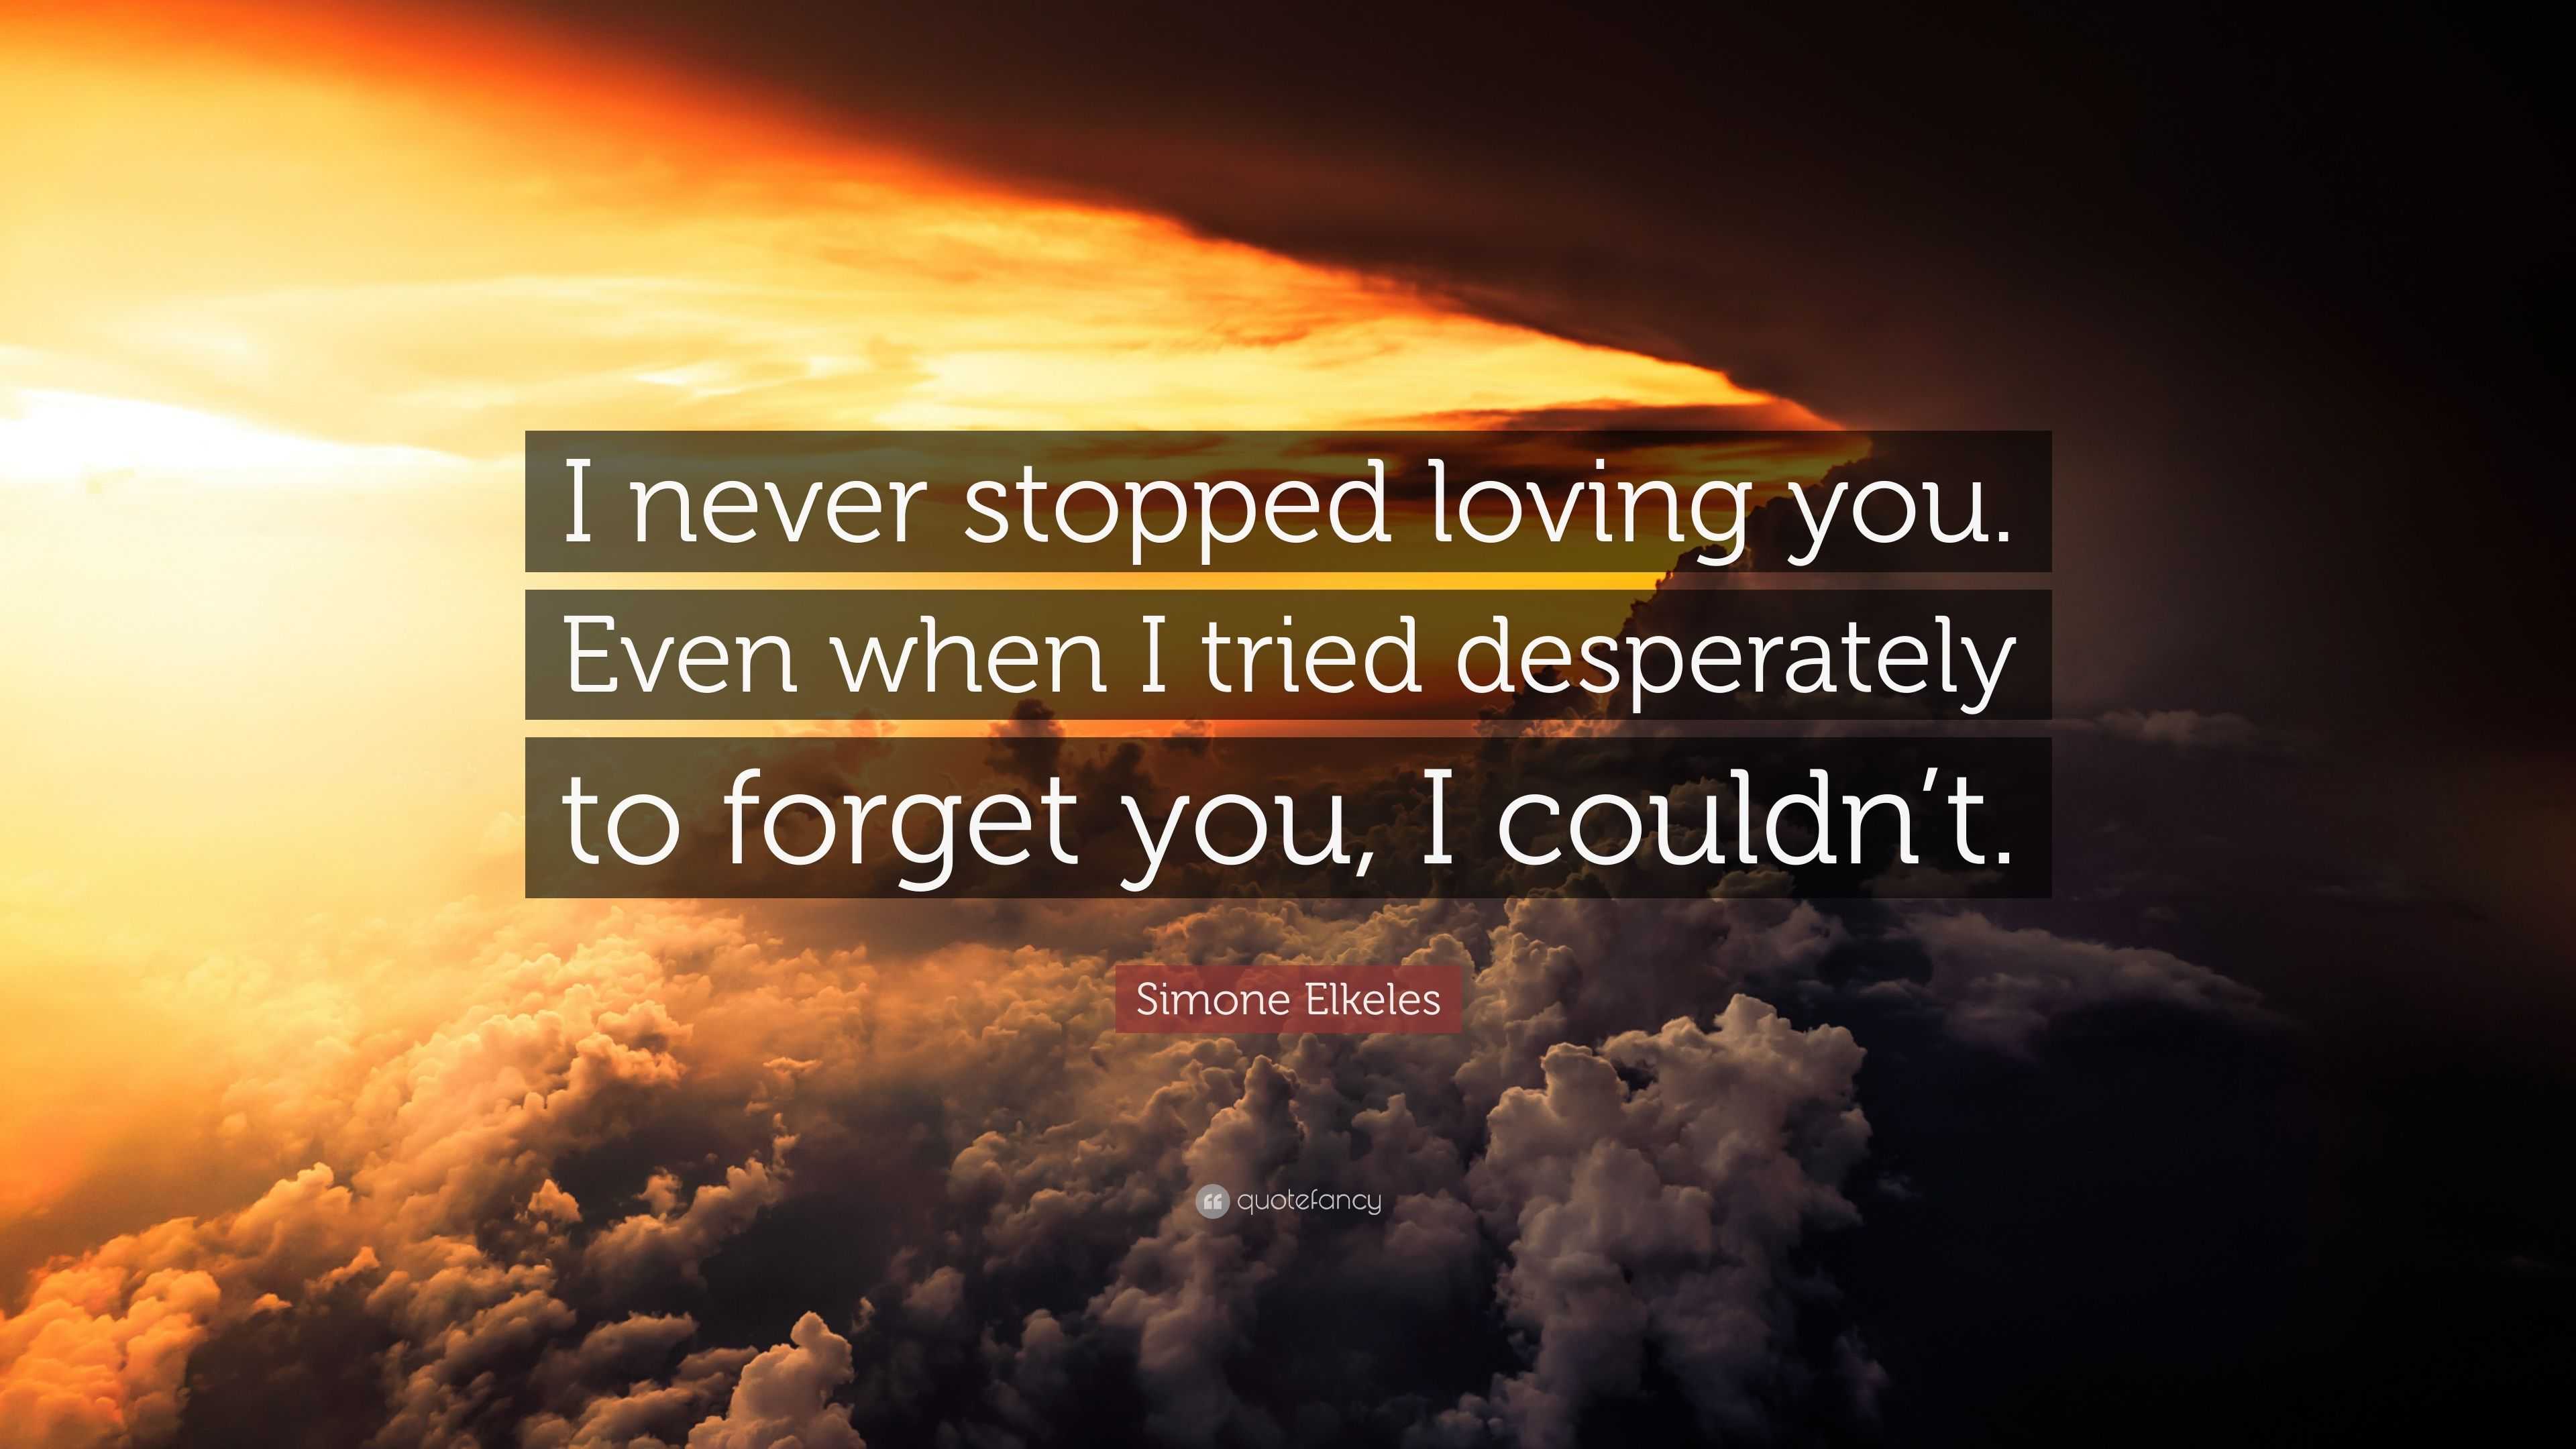 Simone Elkeles Quote “I never stopped loving you Even when I tried desperately